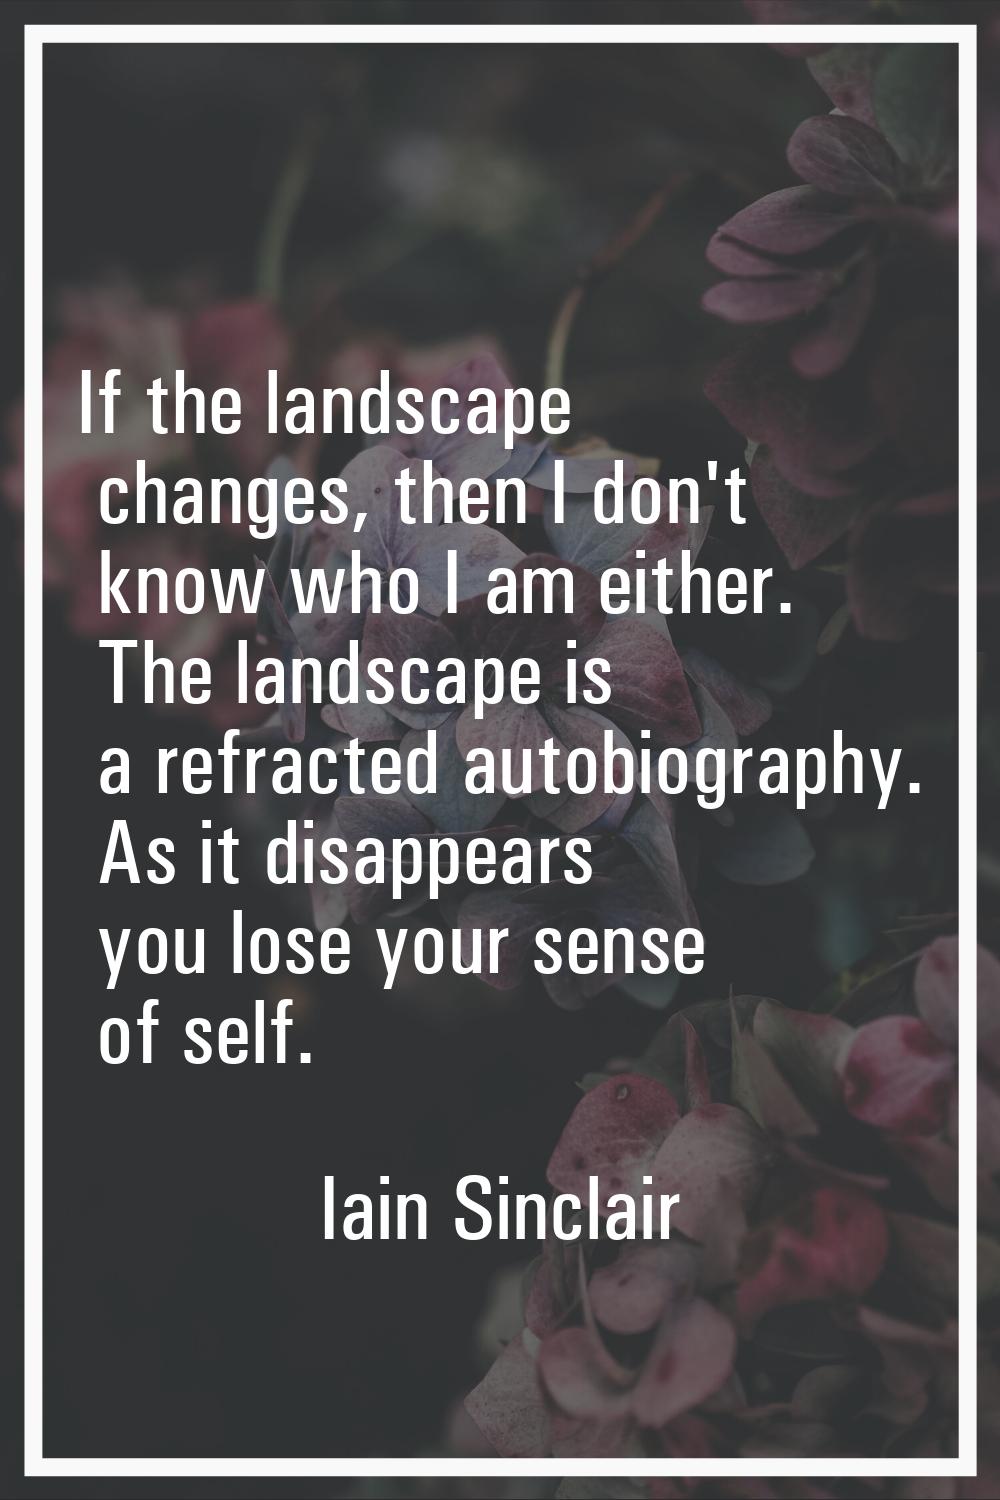 If the landscape changes, then I don't know who I am either. The landscape is a refracted autobiogr